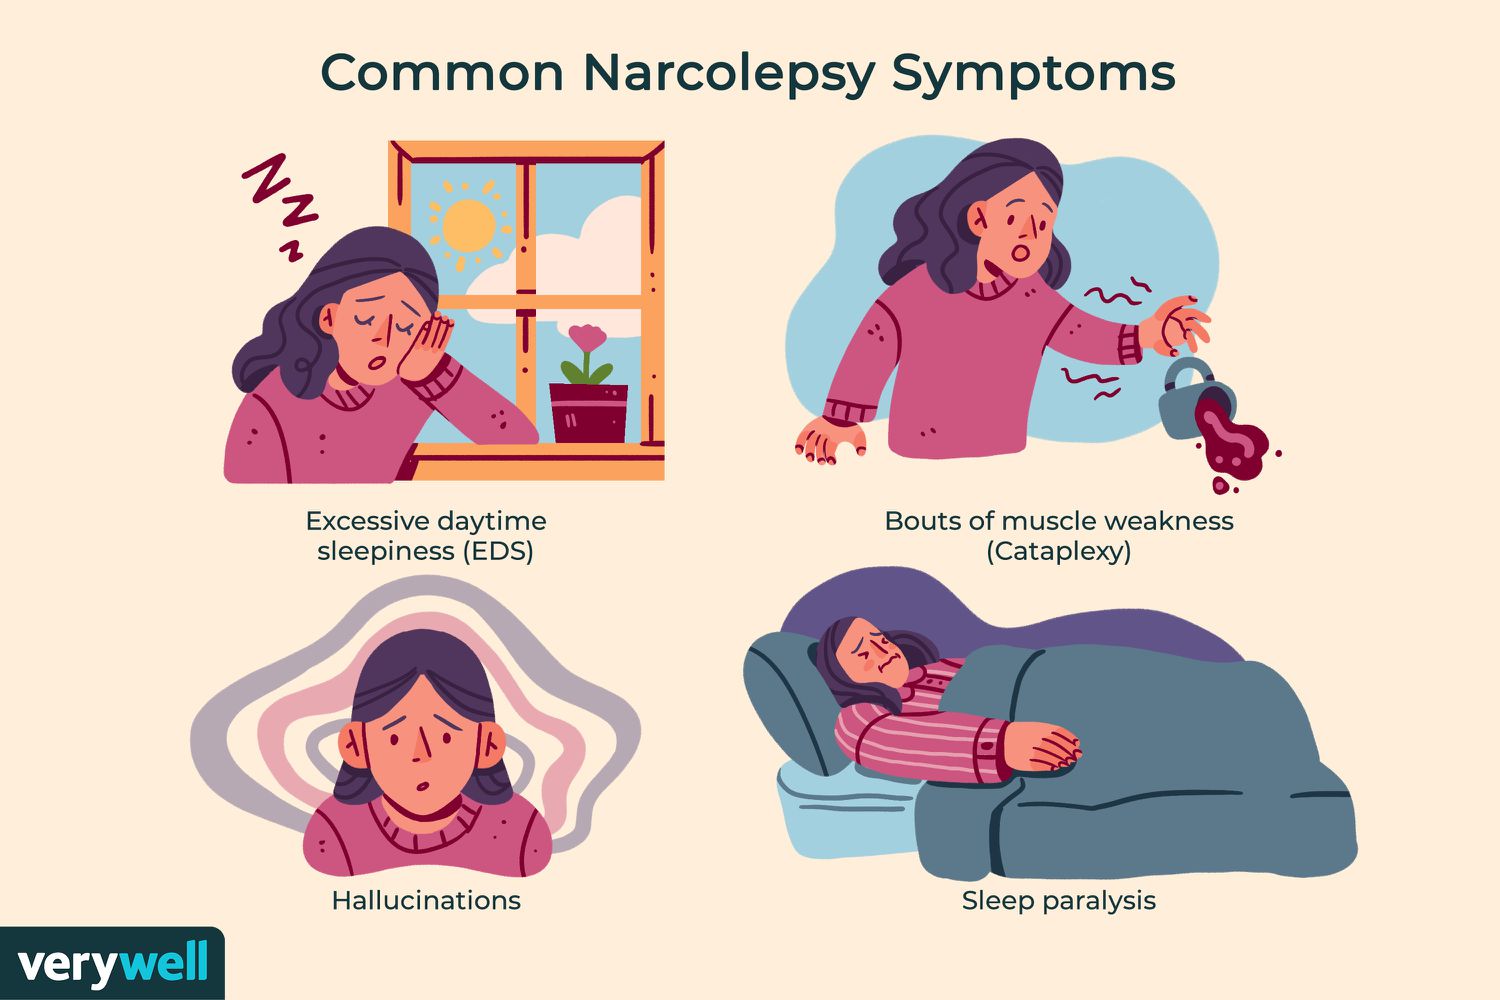 Is narcolepsy a dangerous condition?